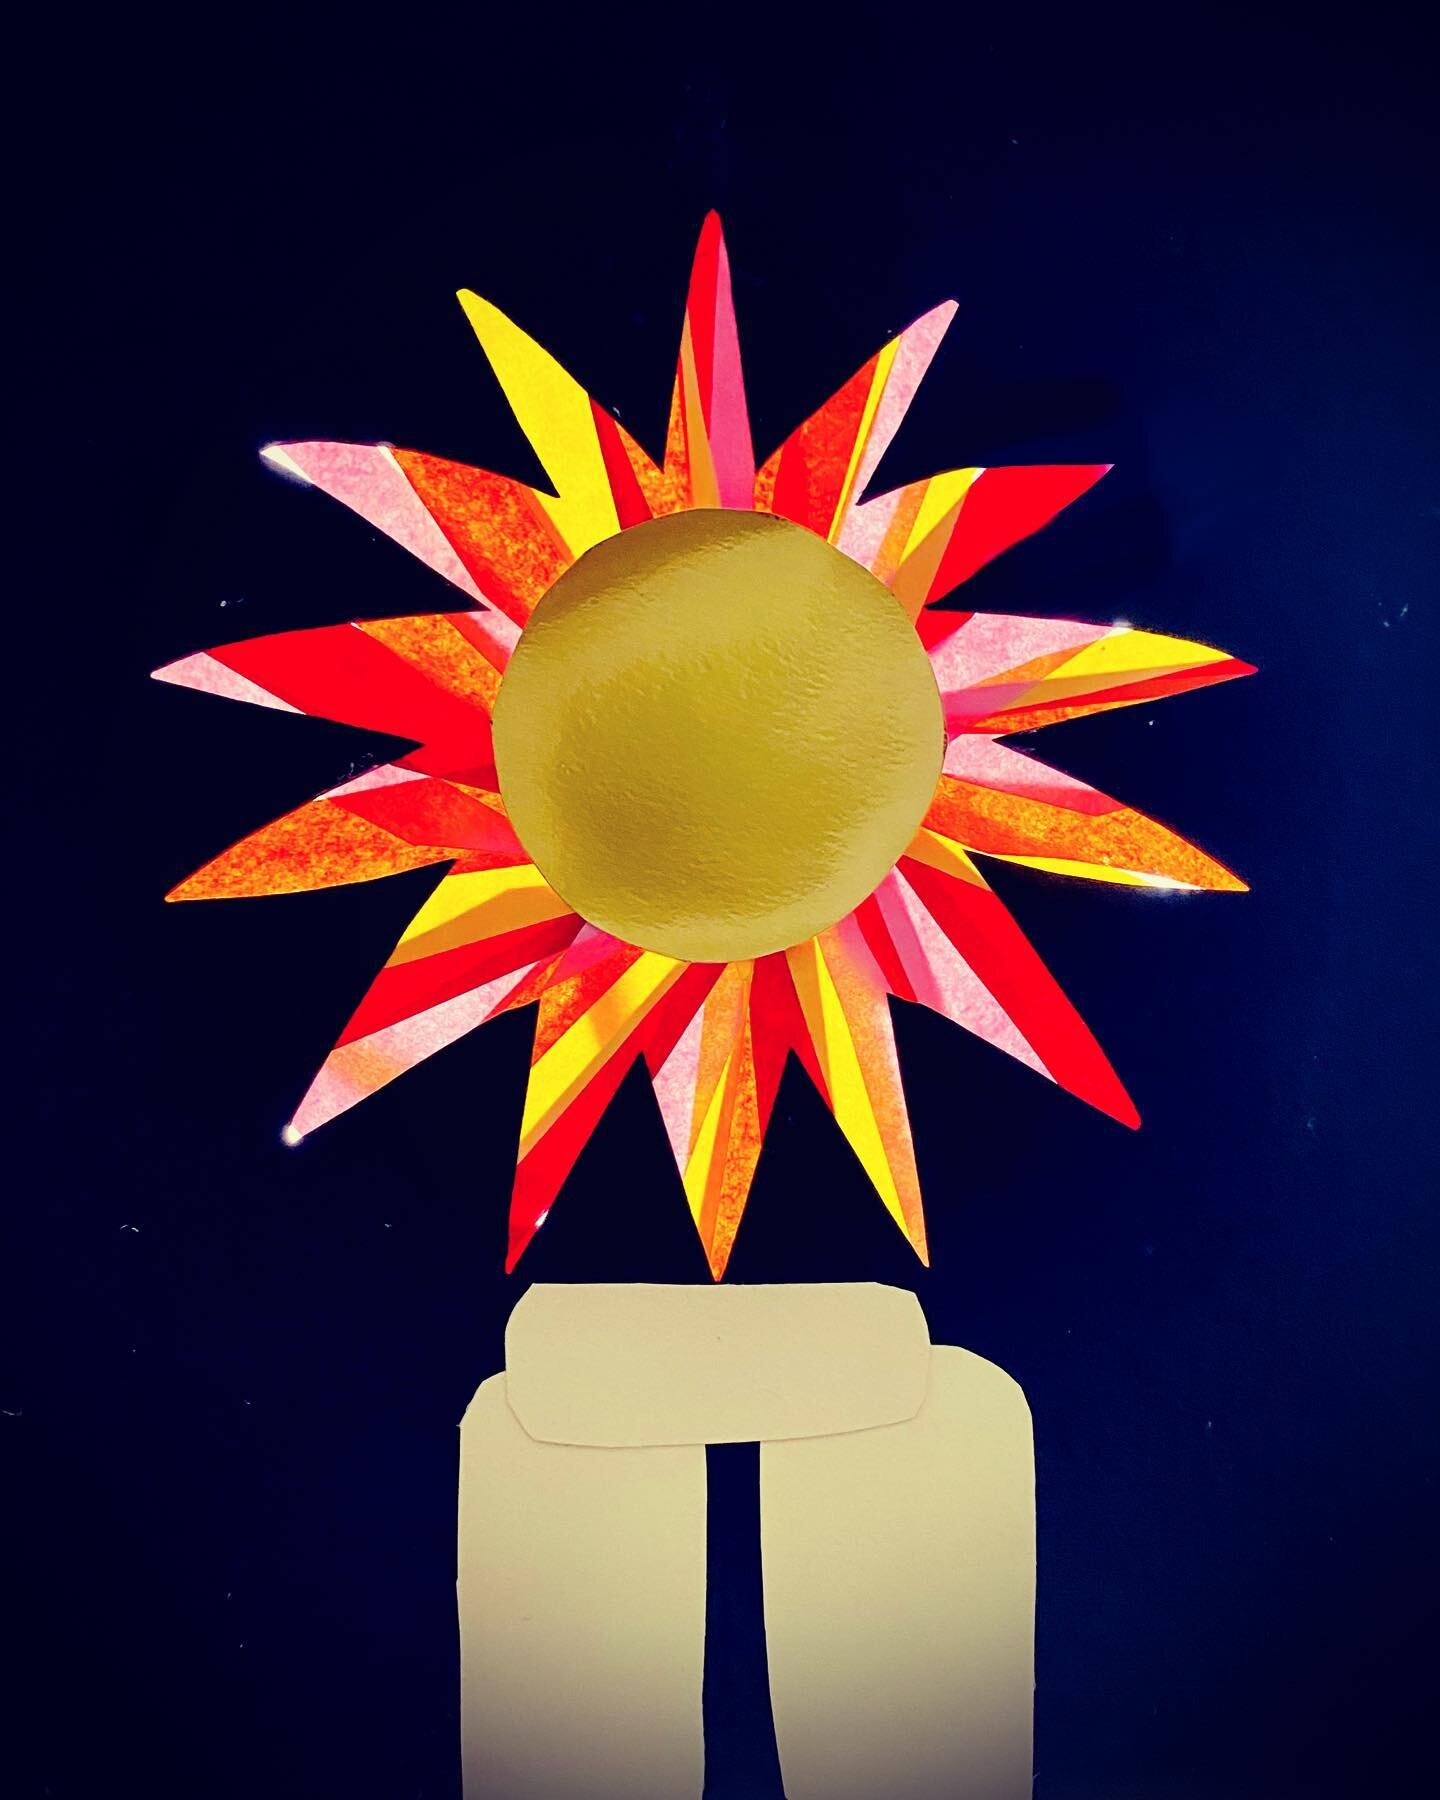 Happy Summer Solstice 2022. From a Stonehenge and solstice/stained glass card making activity ☀️
#solstice #summersolstice #stonehenge #sun #stainedglass #shescrafty